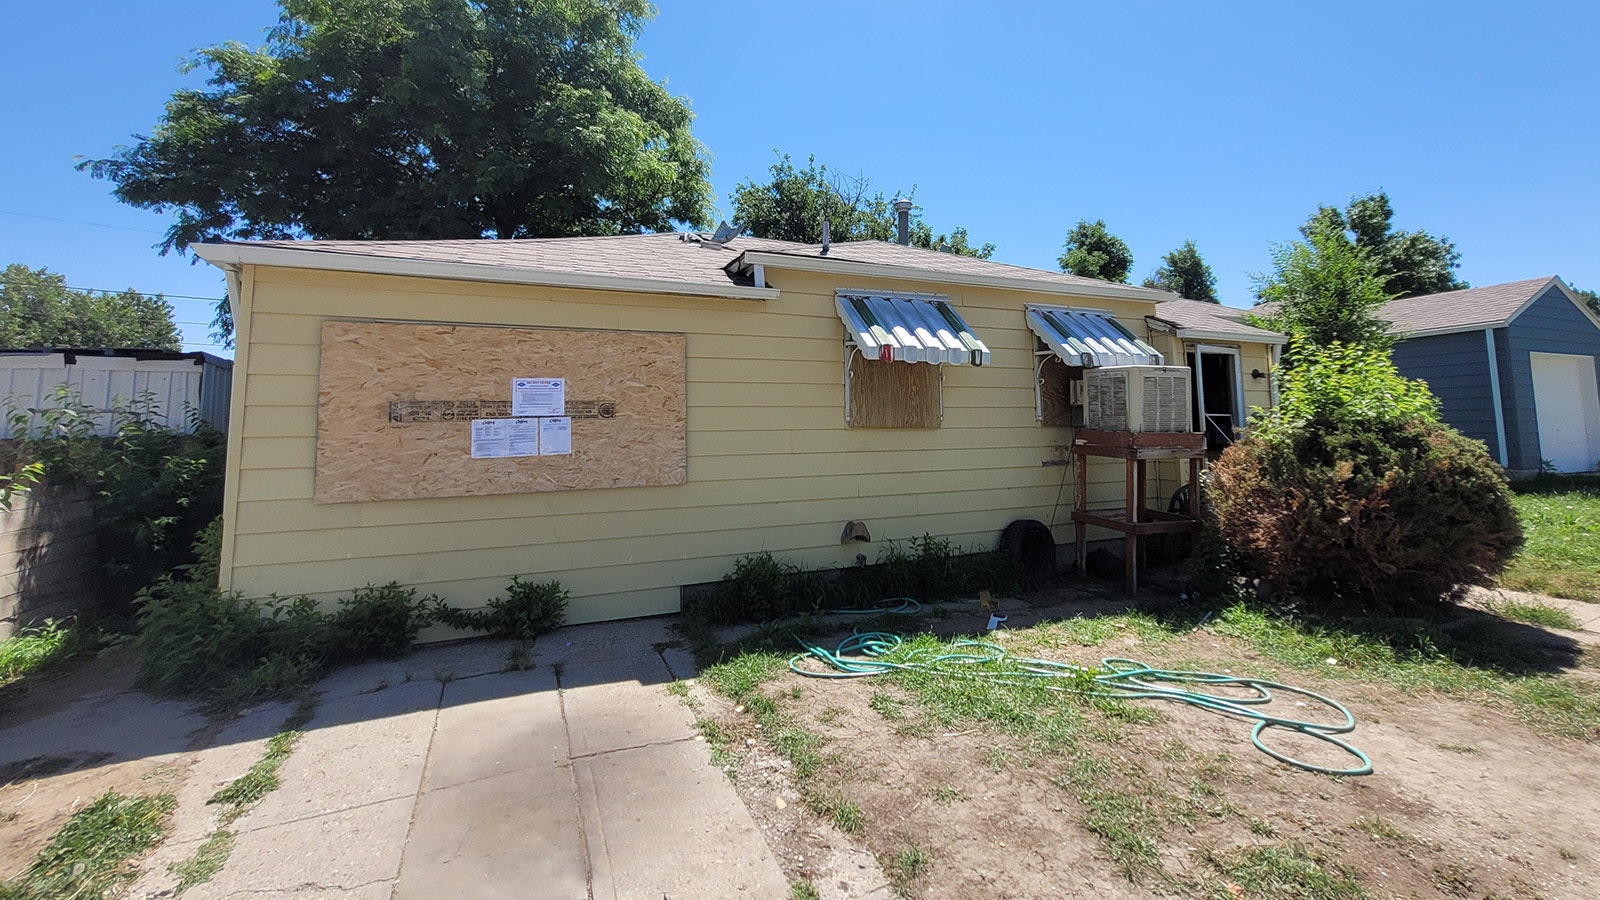 The City of Casper designed this house in the 1500 block of Westridge Place a “dangerous” building after drug activity and squatters took it over.